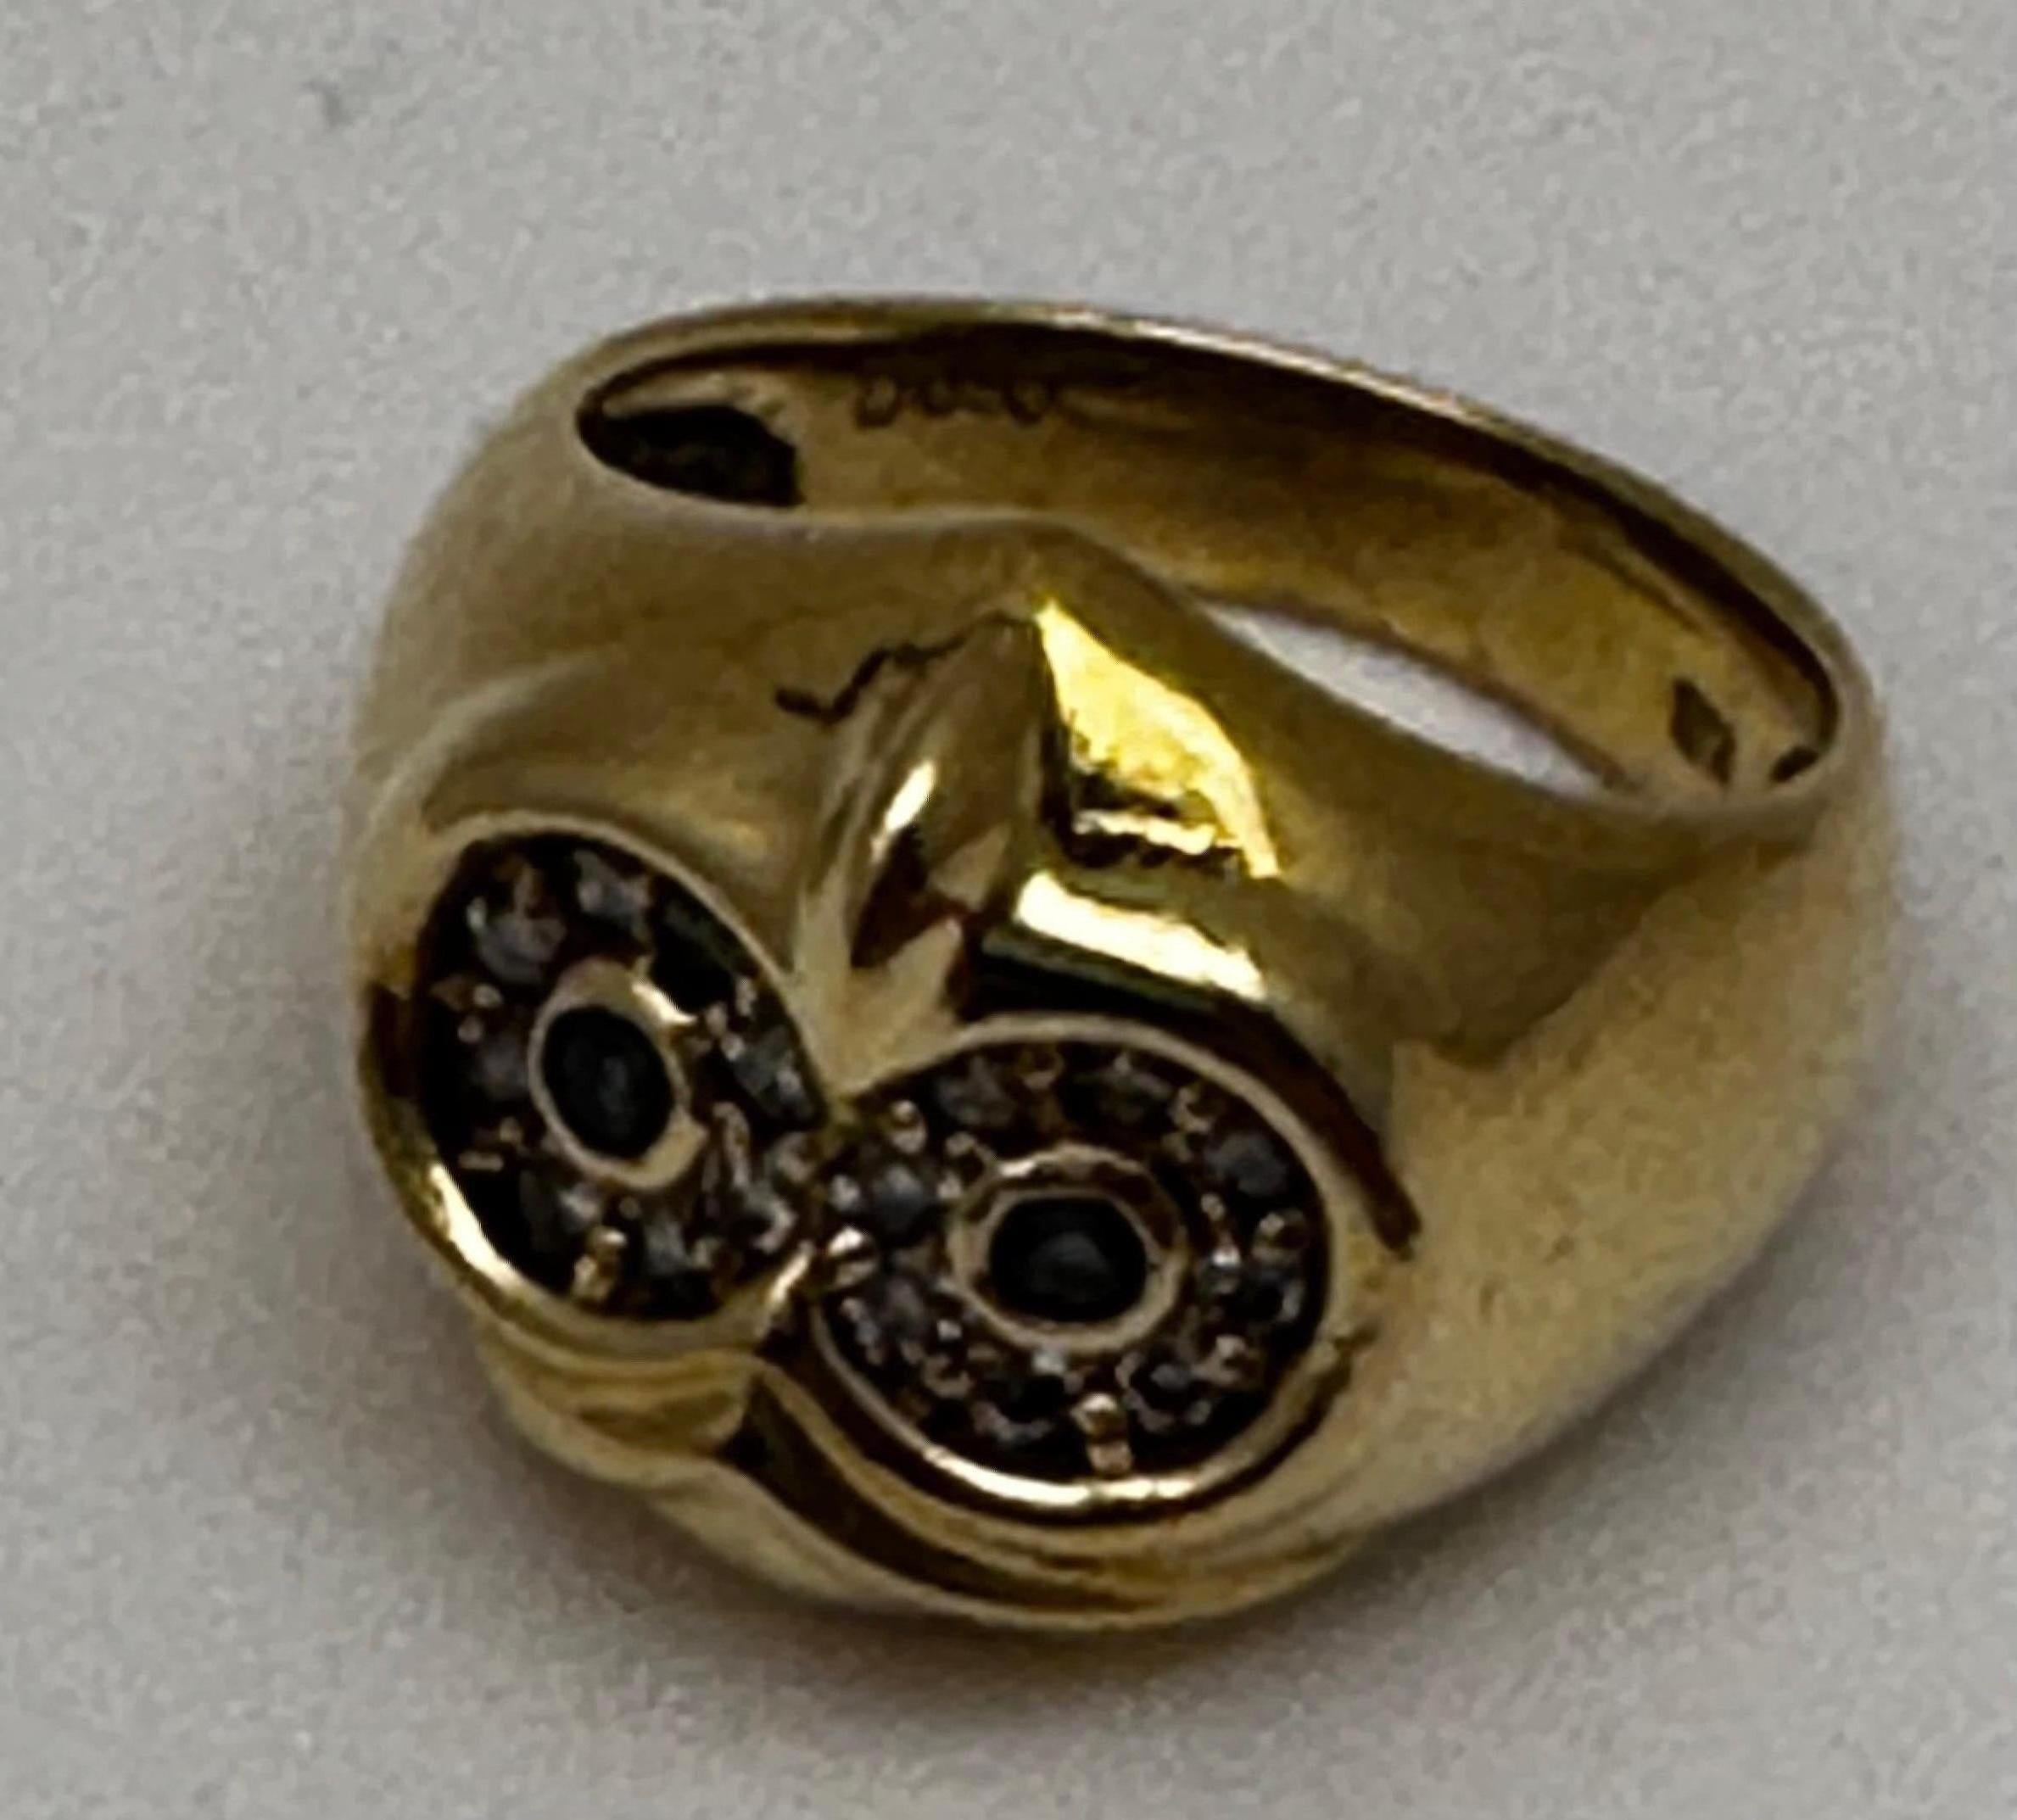 Vintage 18kt Yellow Gold 16mm Wide Sapphire Diamond OWL Ring Size 6 1/4 For Sale 3